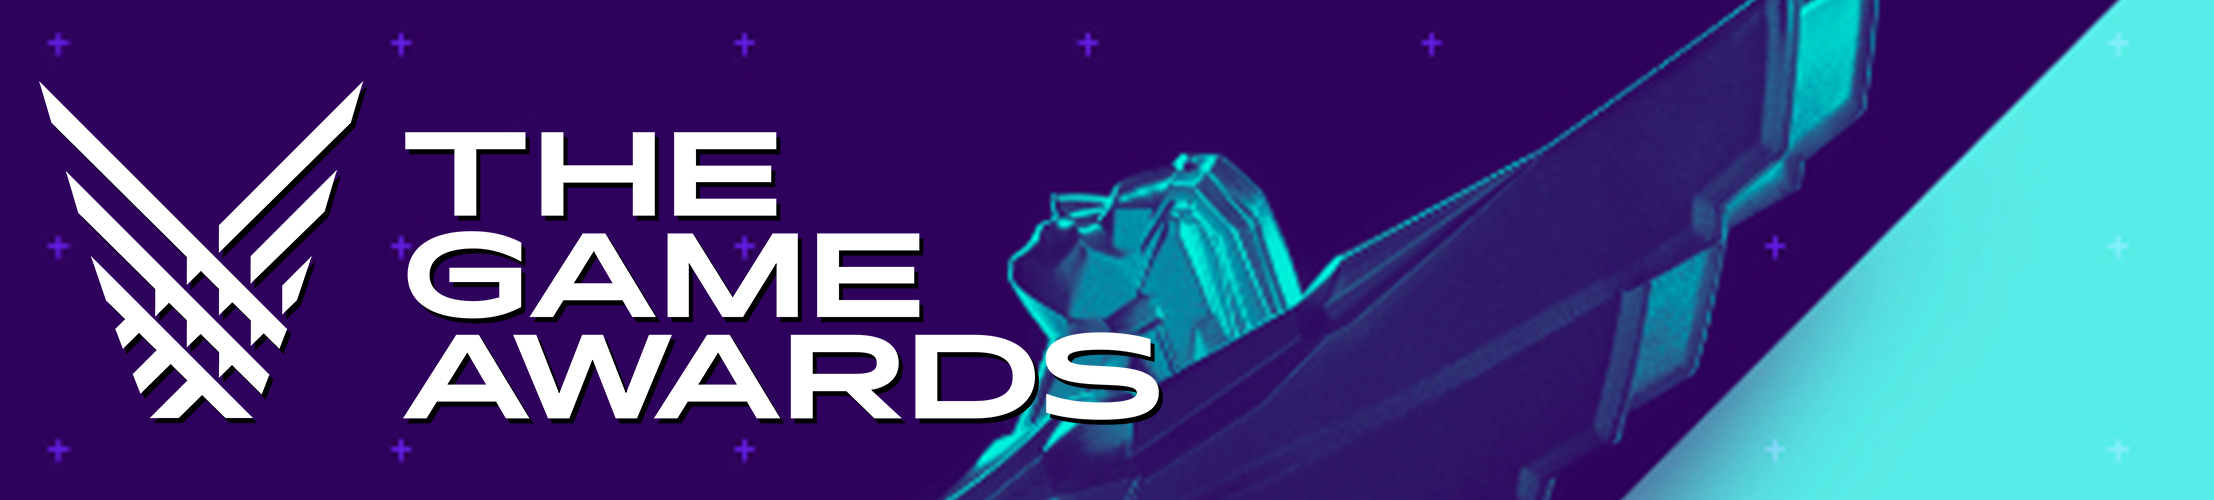 The Game Awards 2018 Banner